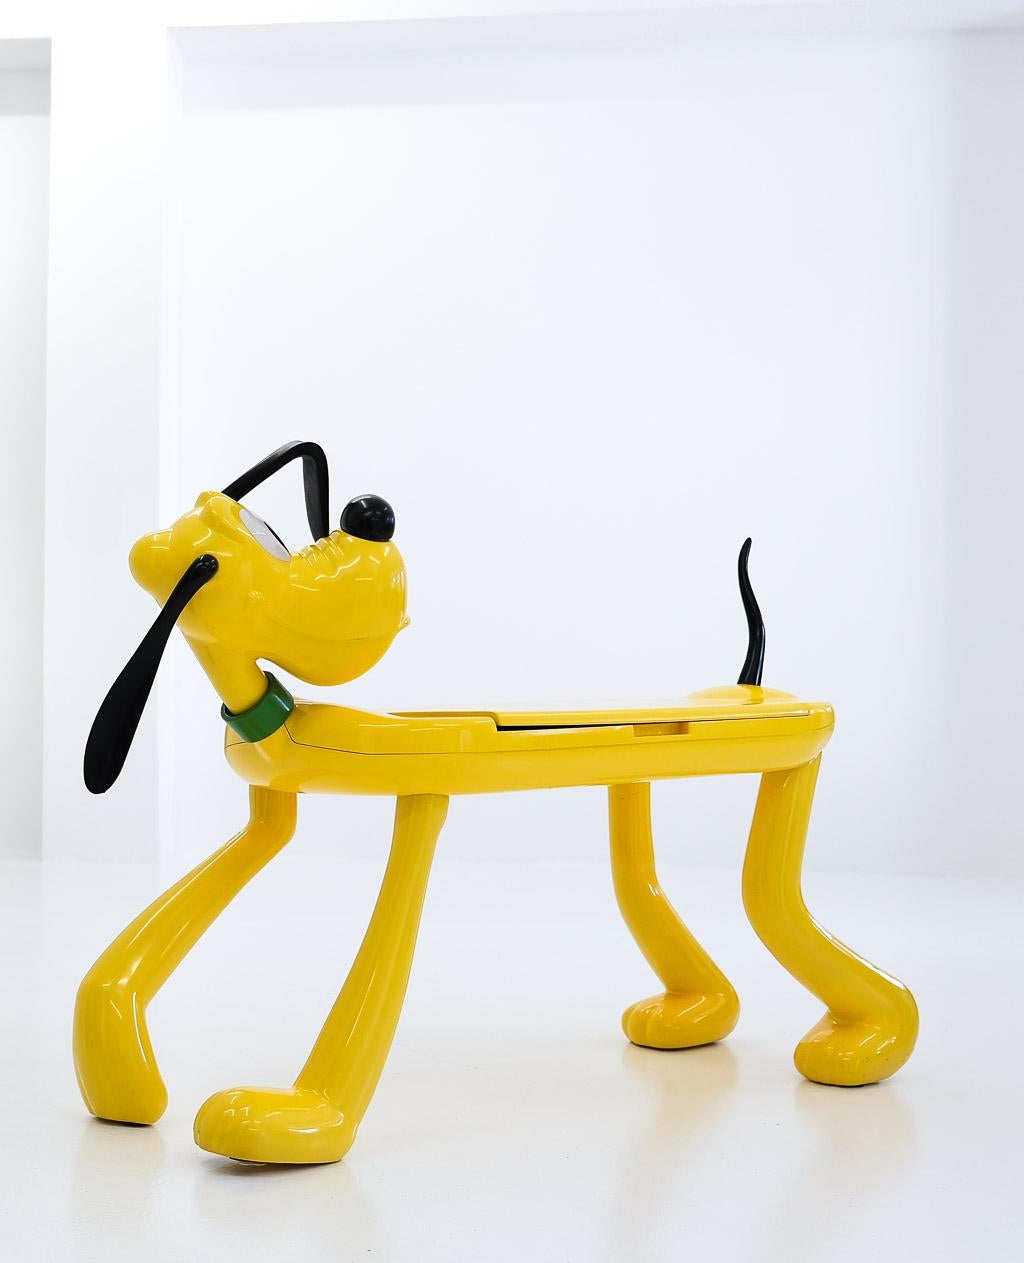 Pluto‘ kids table / play desk, by pierre colleu for disney, manufactured by starform, france, 1980s, painted resin, laminated wood, plastic. Good original condition with minor wear, consistent with age and usage.